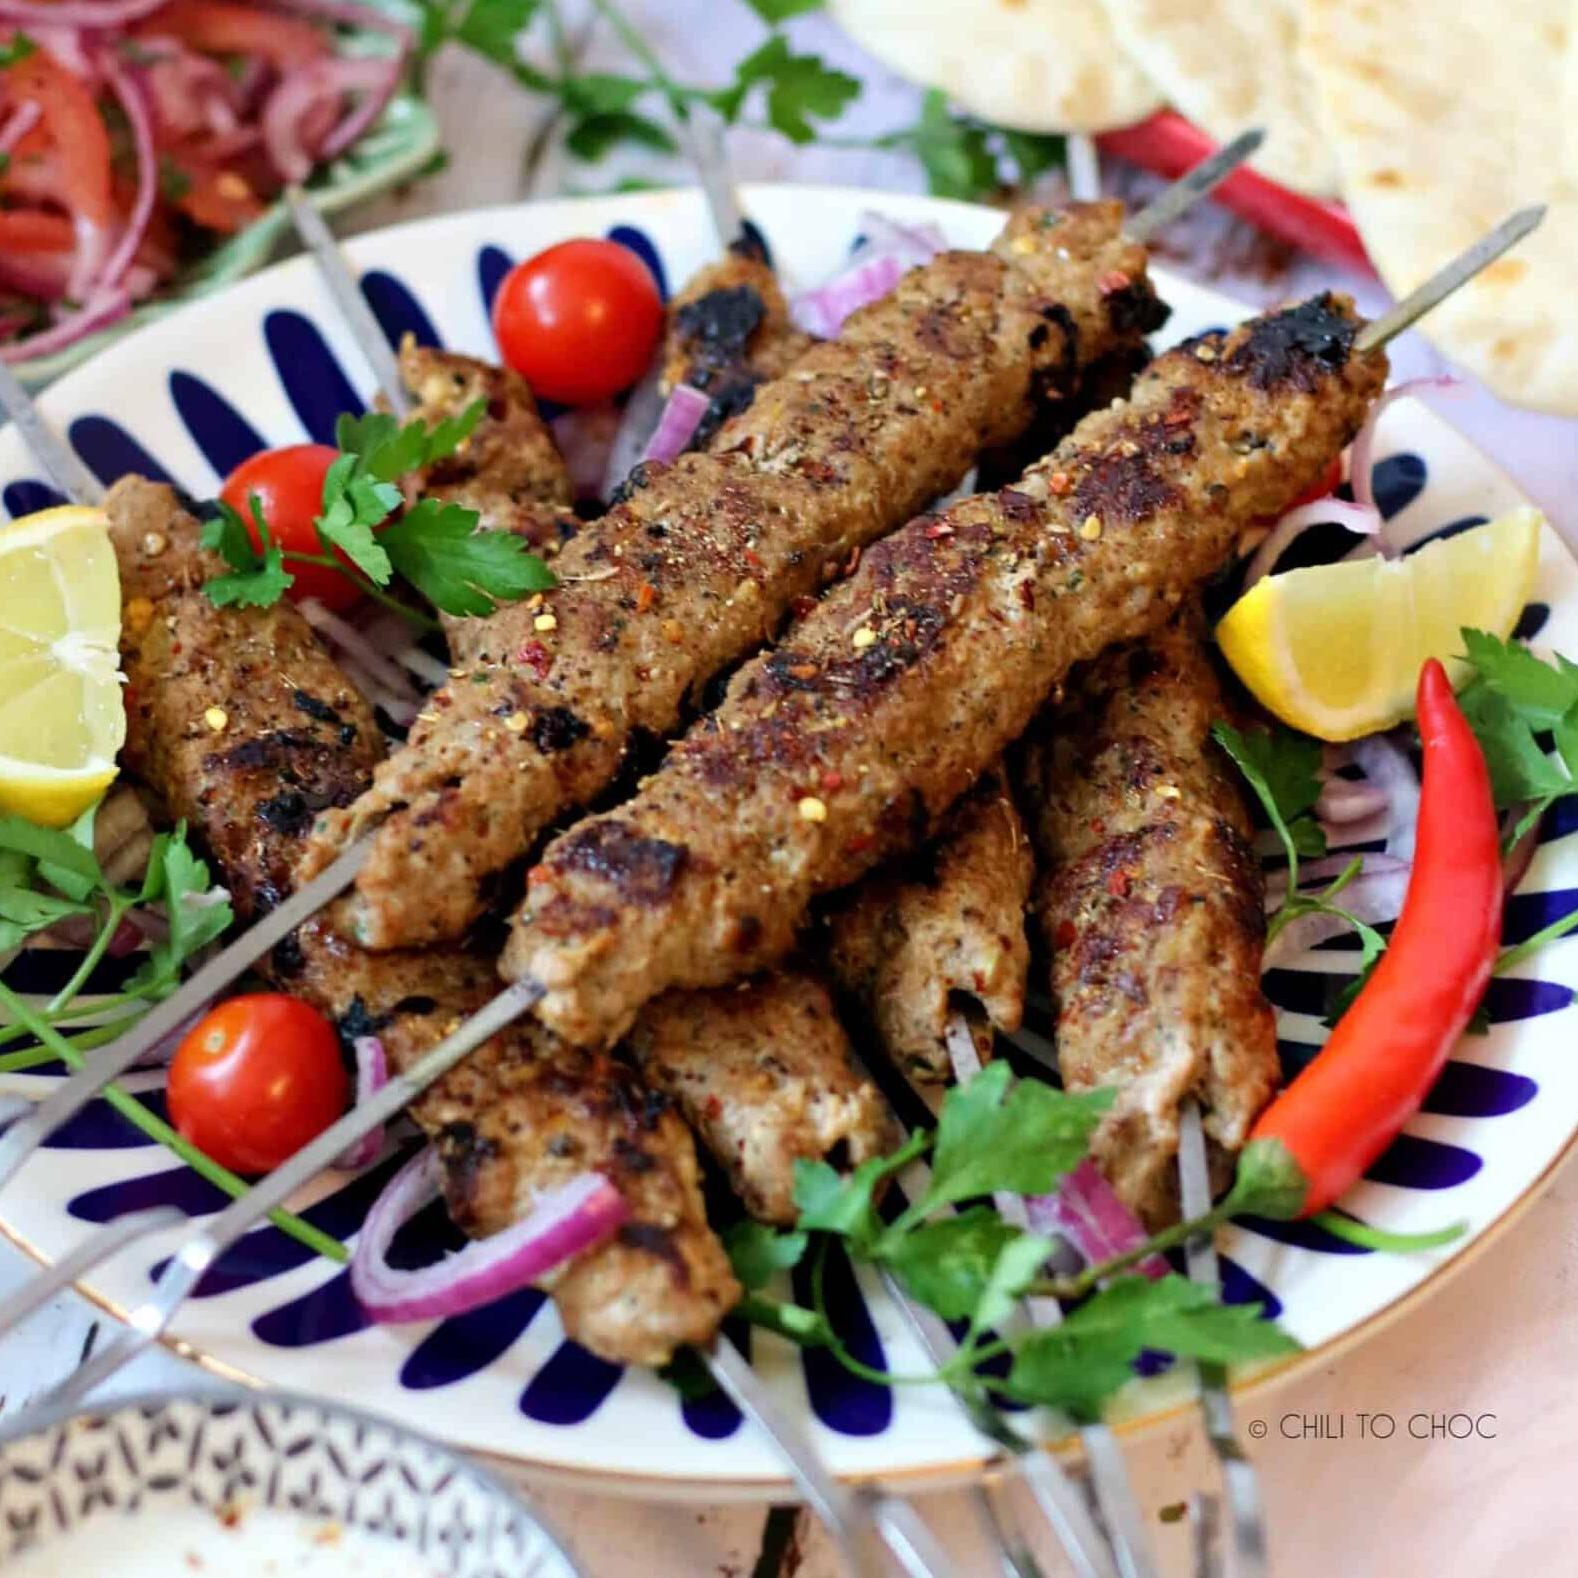  Juicy Adana Kebab that you will drool over!